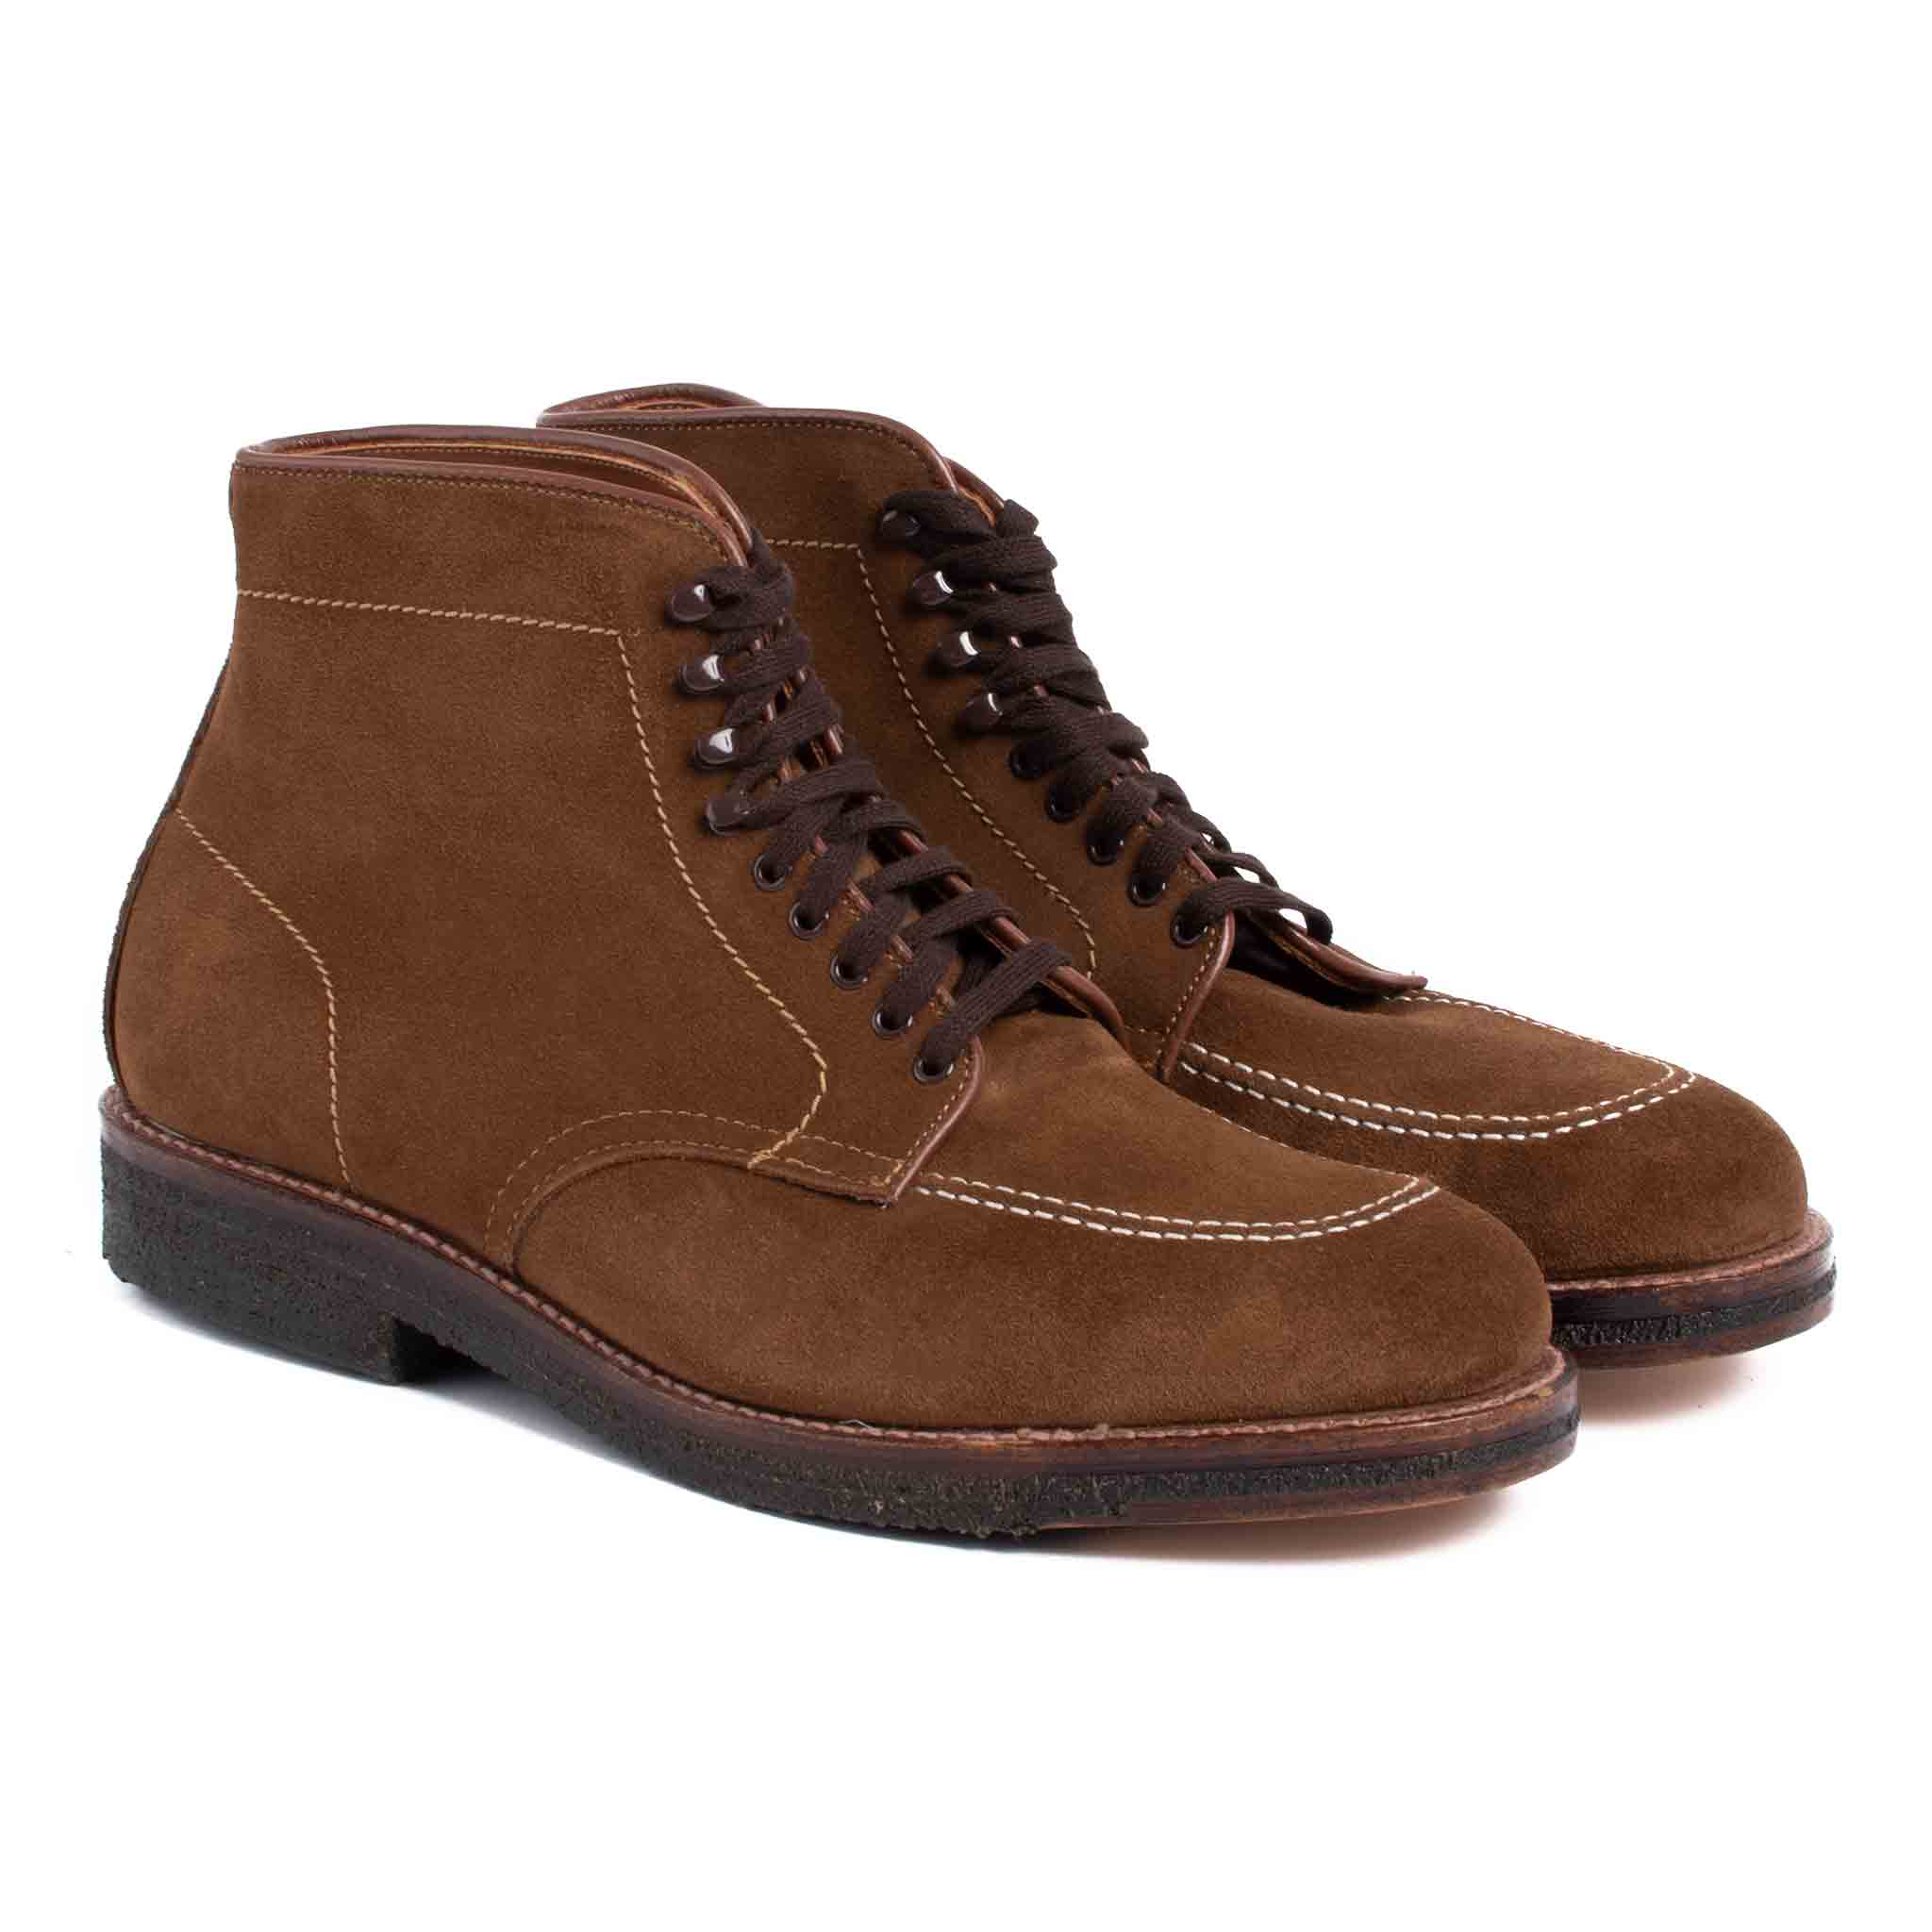 Alden Snuff Suede Indy Boot with Crepe Sole Side